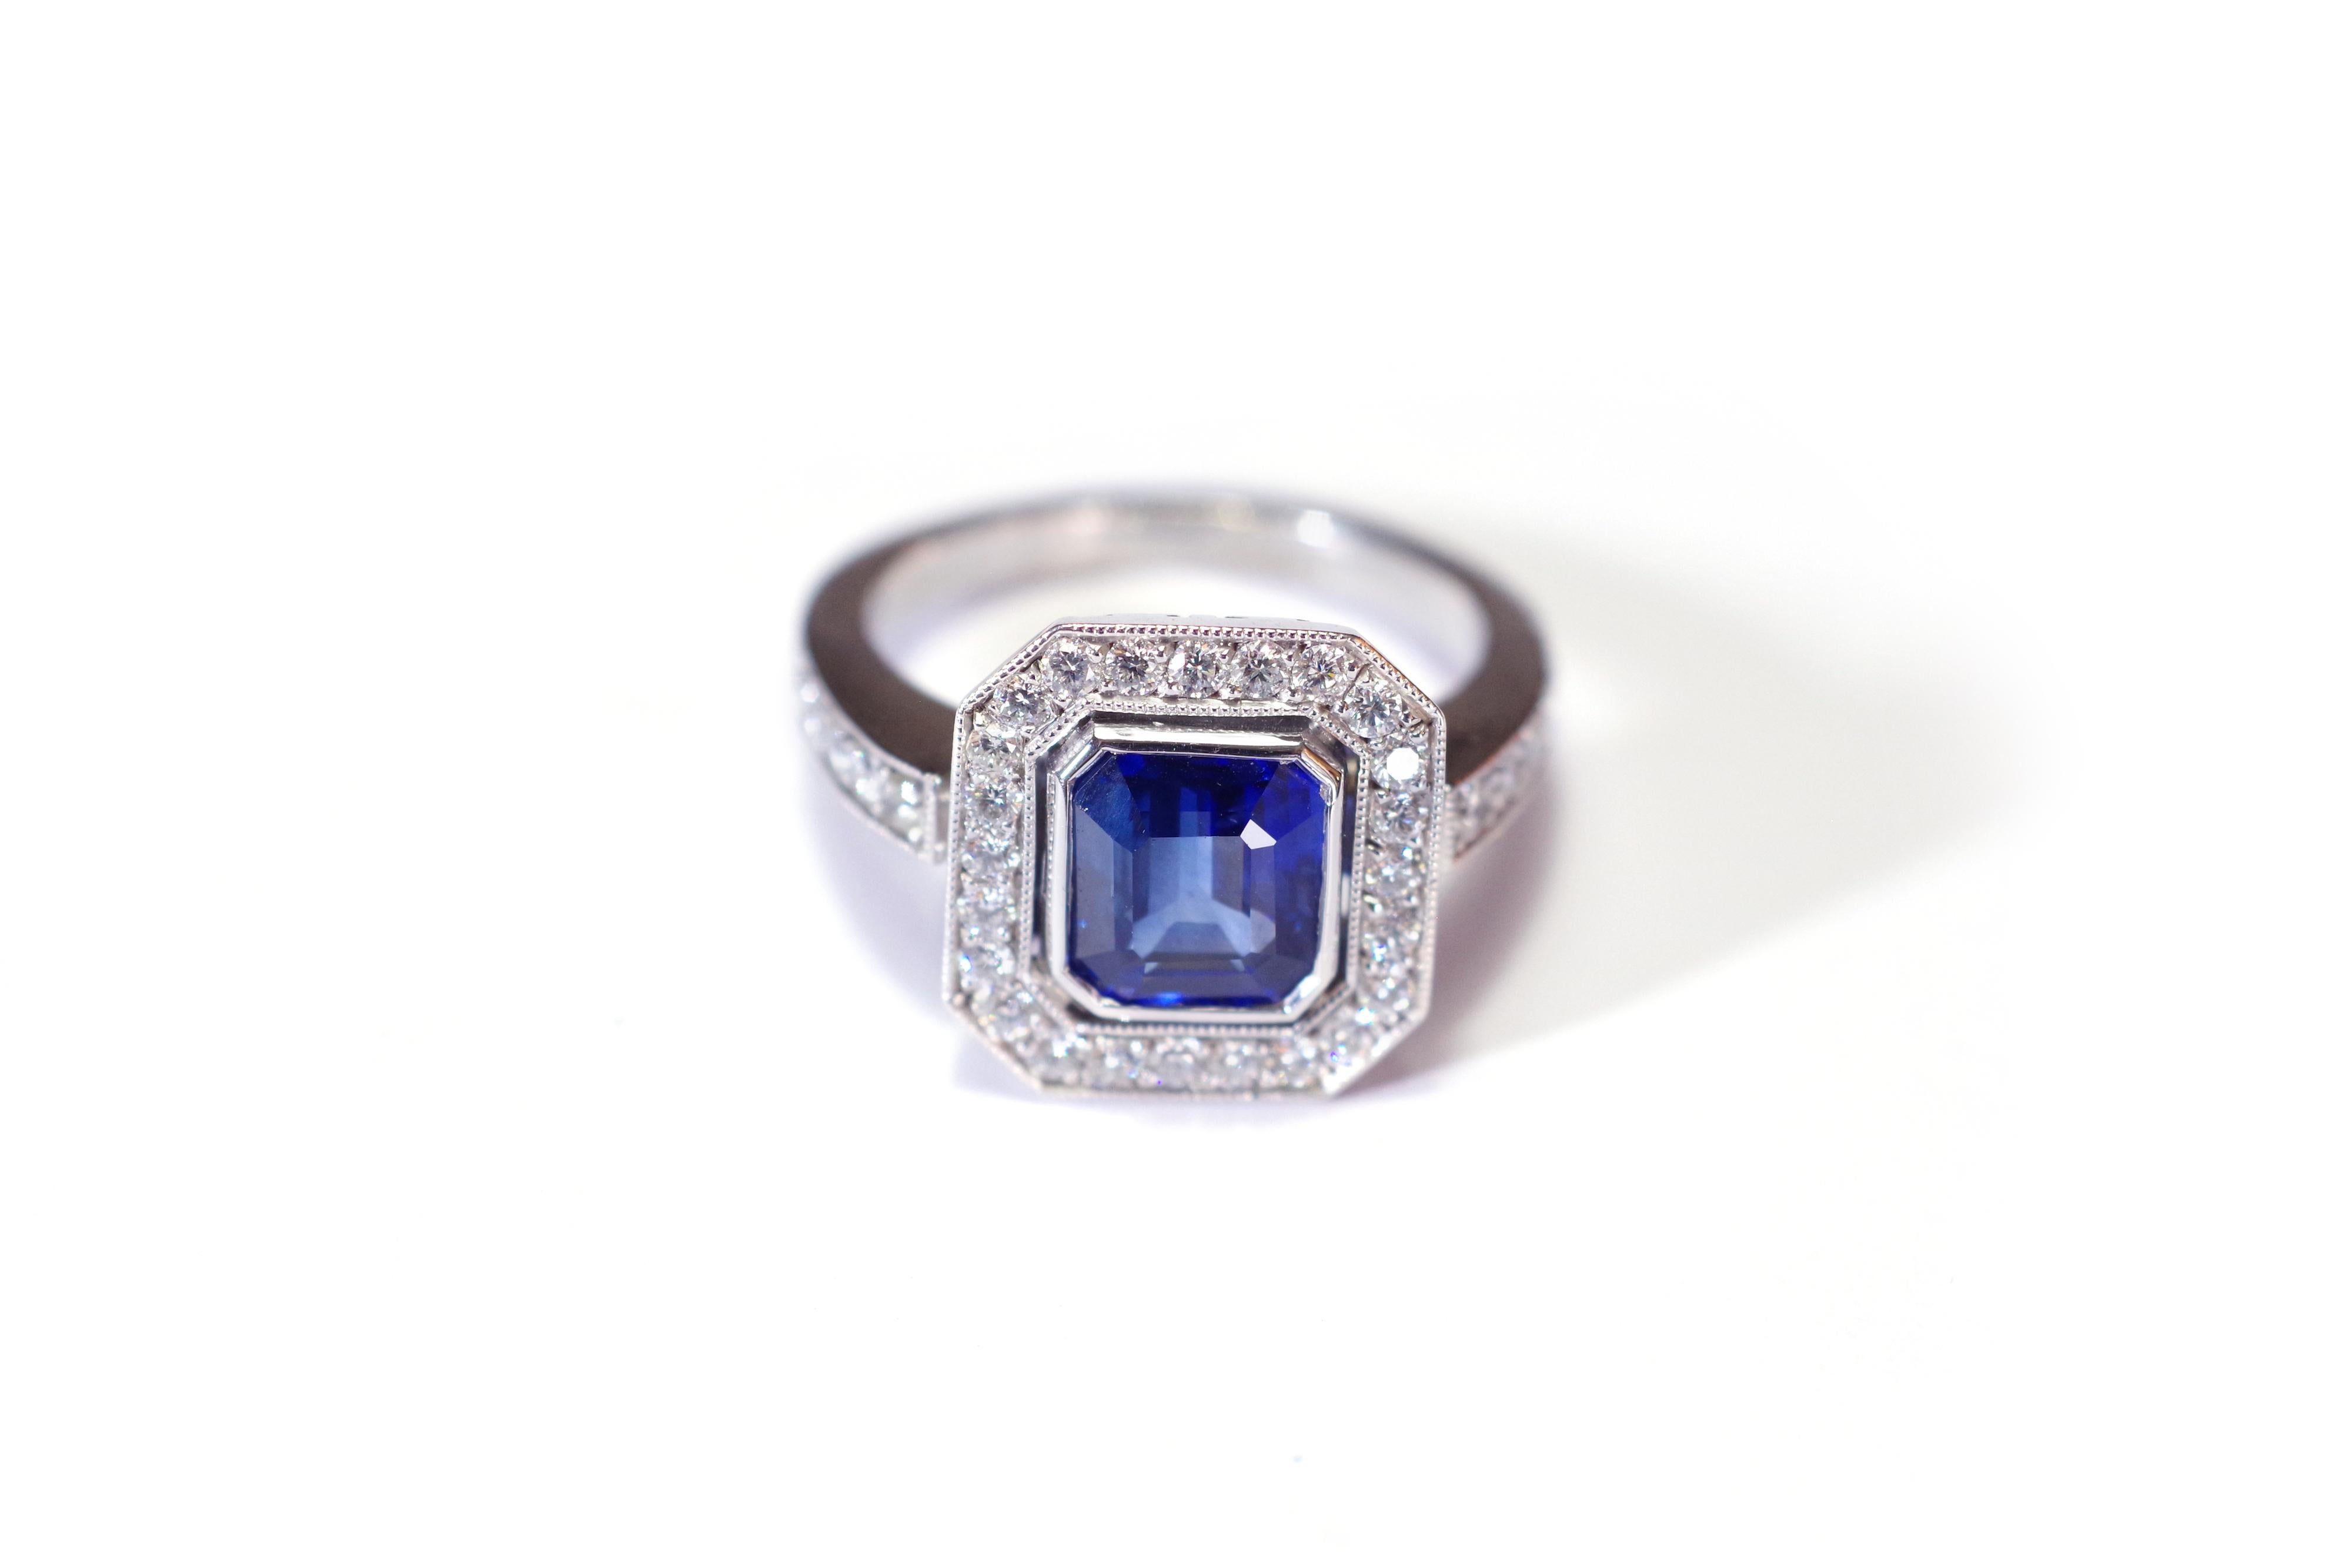 Art Deco style sapphire ring in white gold 18 karats. Important ring with an Art Deco style, within its center an intense blue sapphire of octagonal form. This is a natural sapphire from Madagascar. This sapphire is in close setting and surrounded